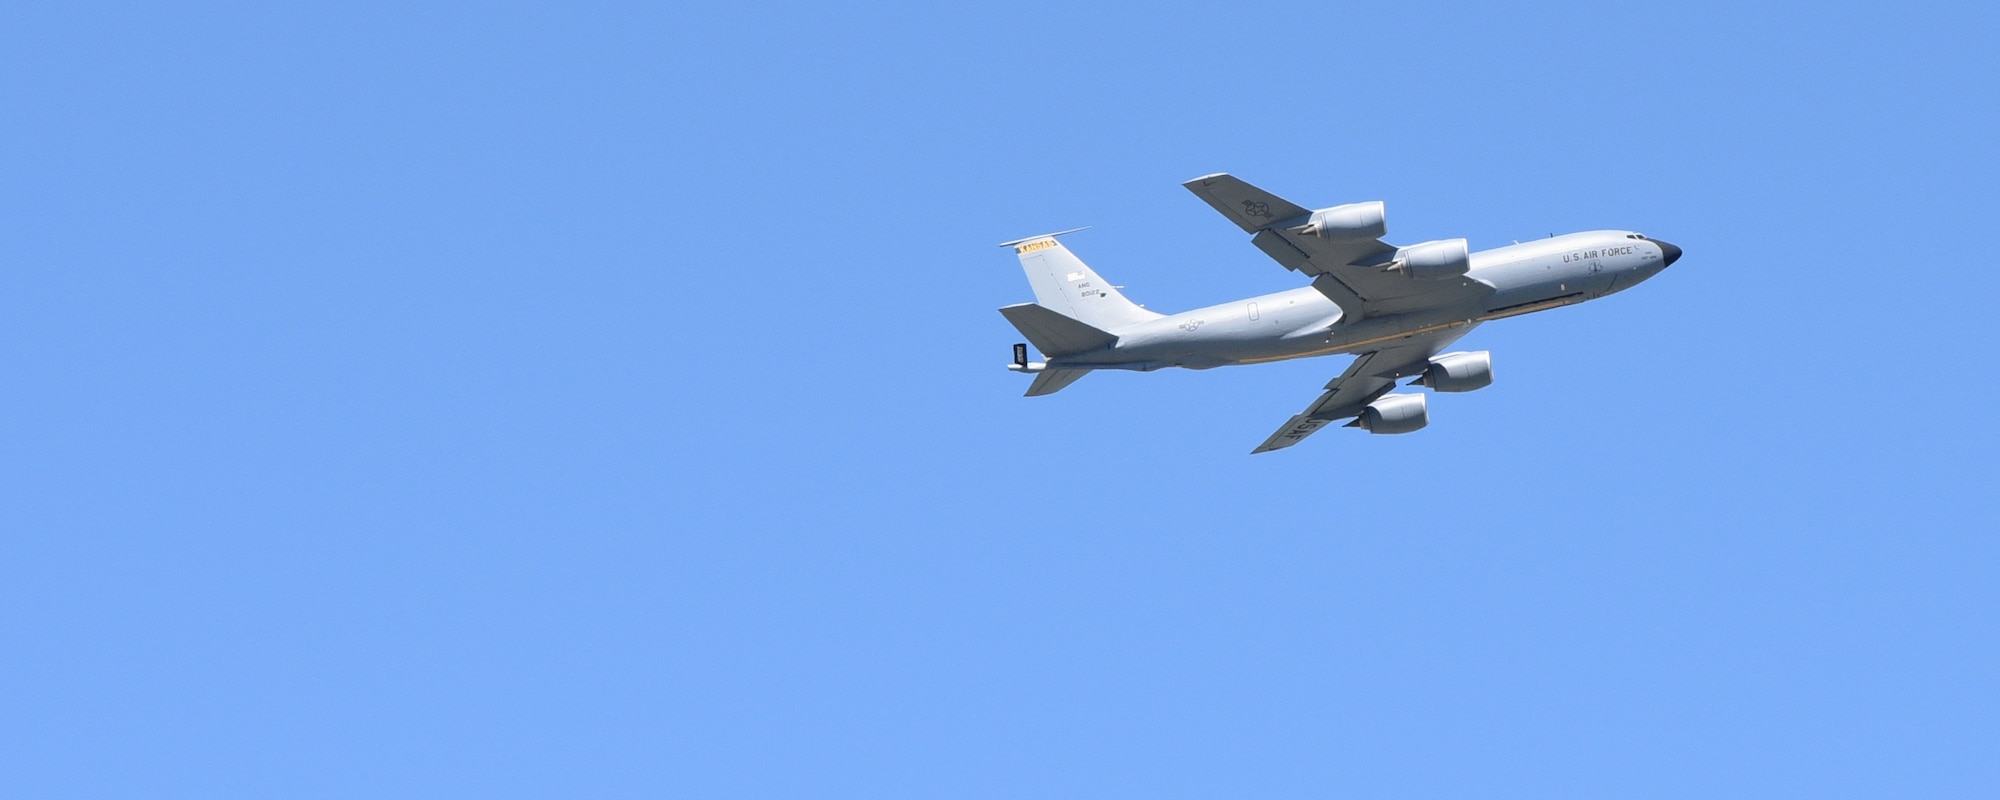 A Team McConnell KC-135 Stratotanker takes off for an in-air refueling flight